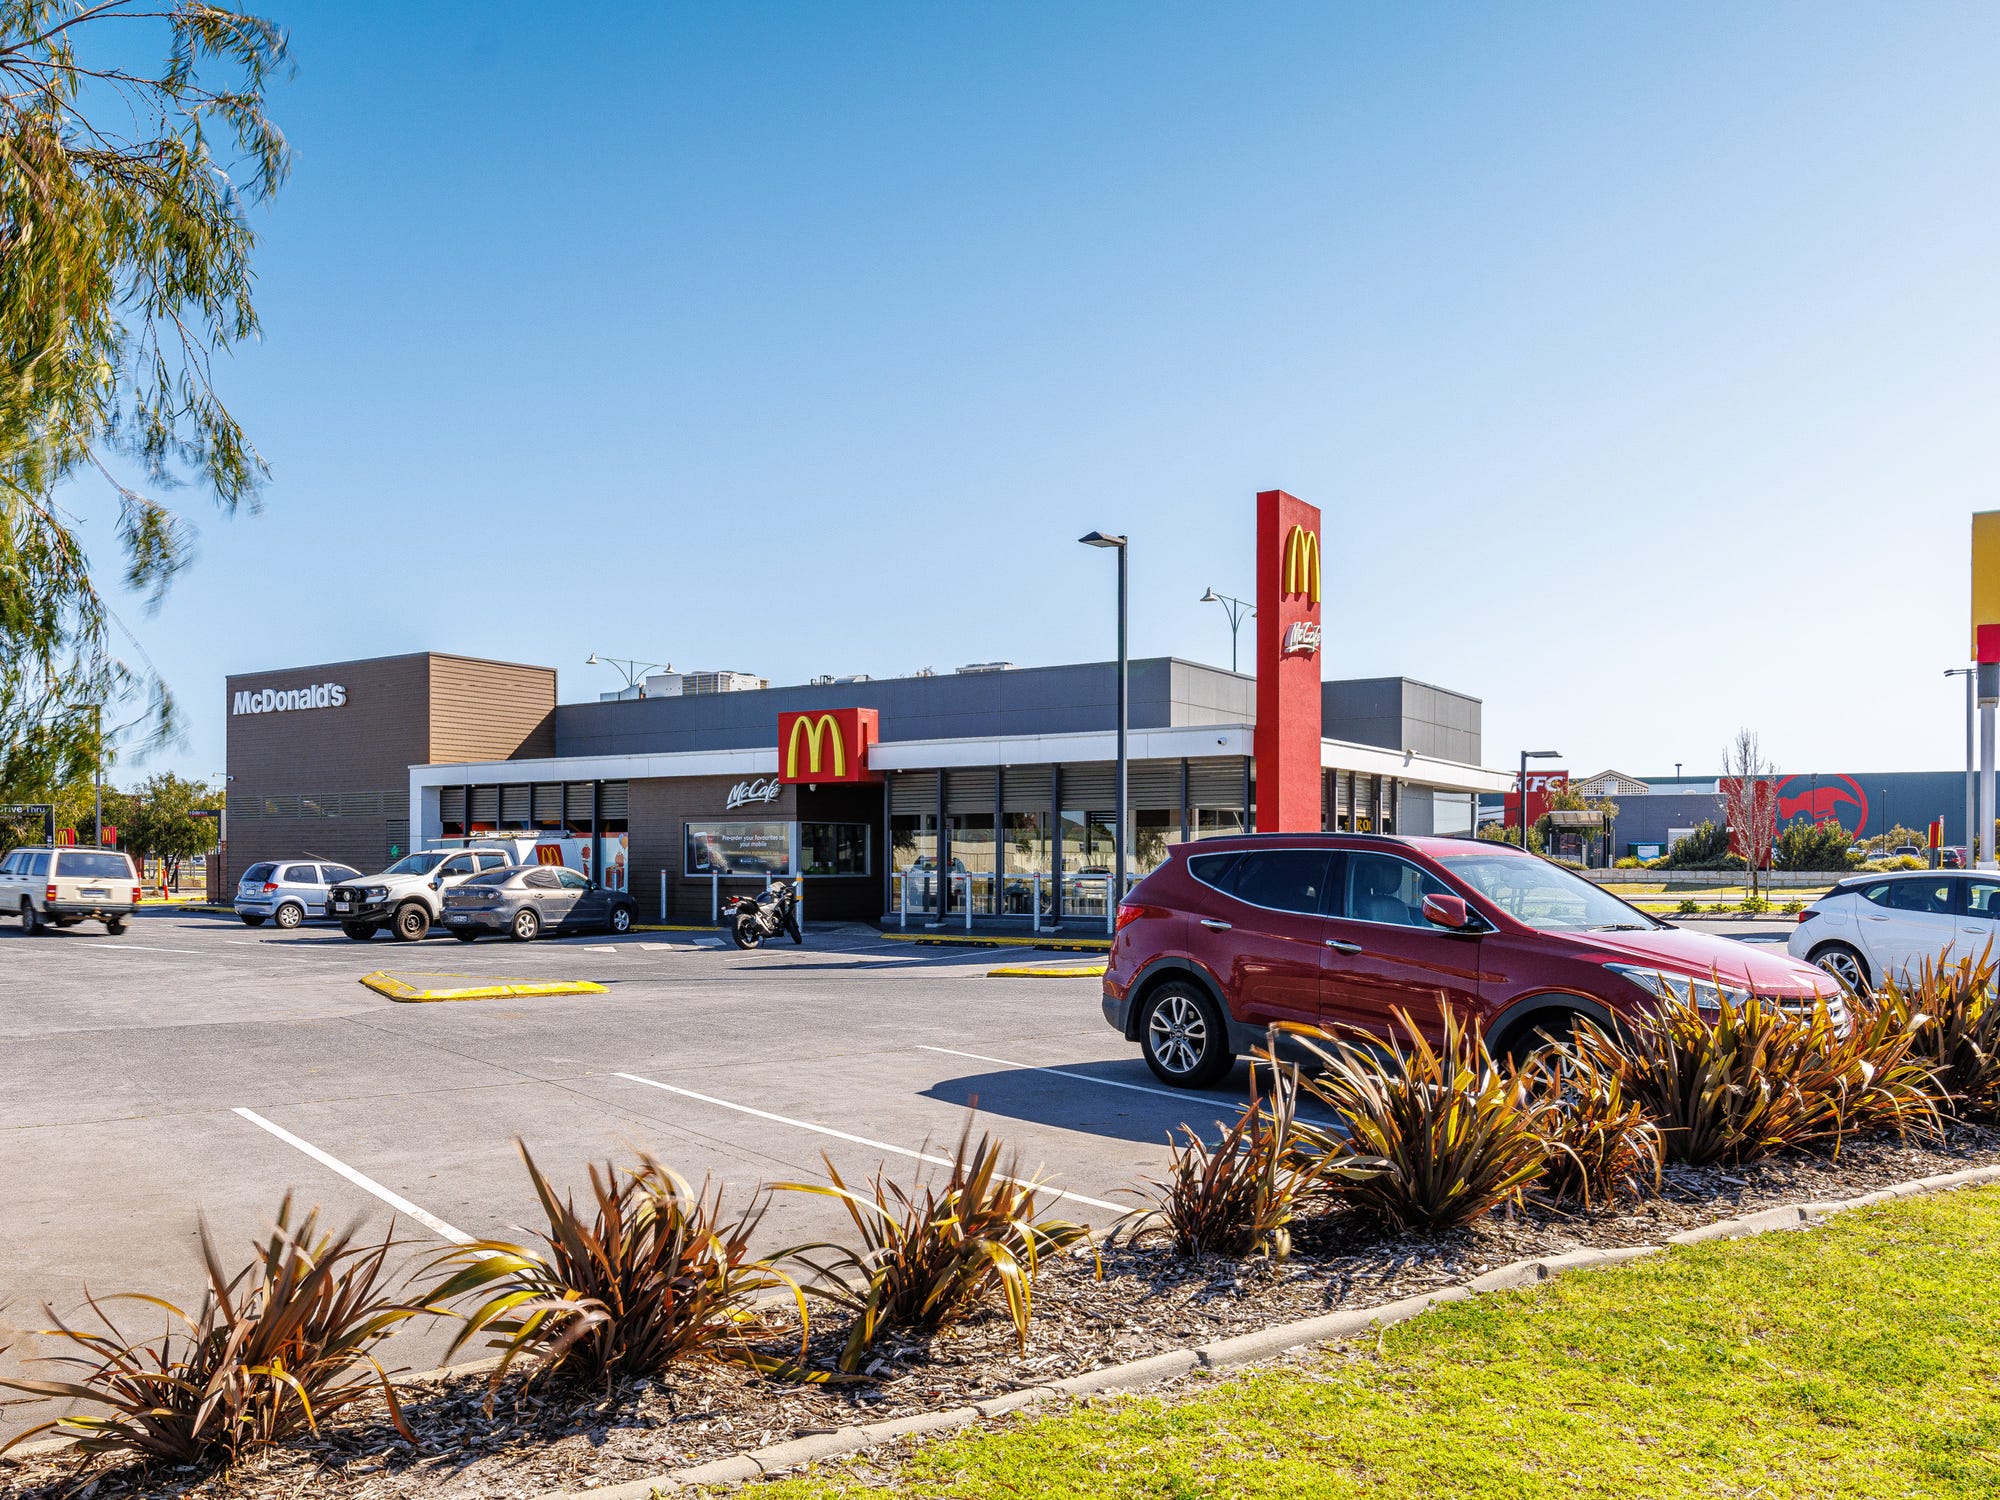 Standalone fast-food outlets